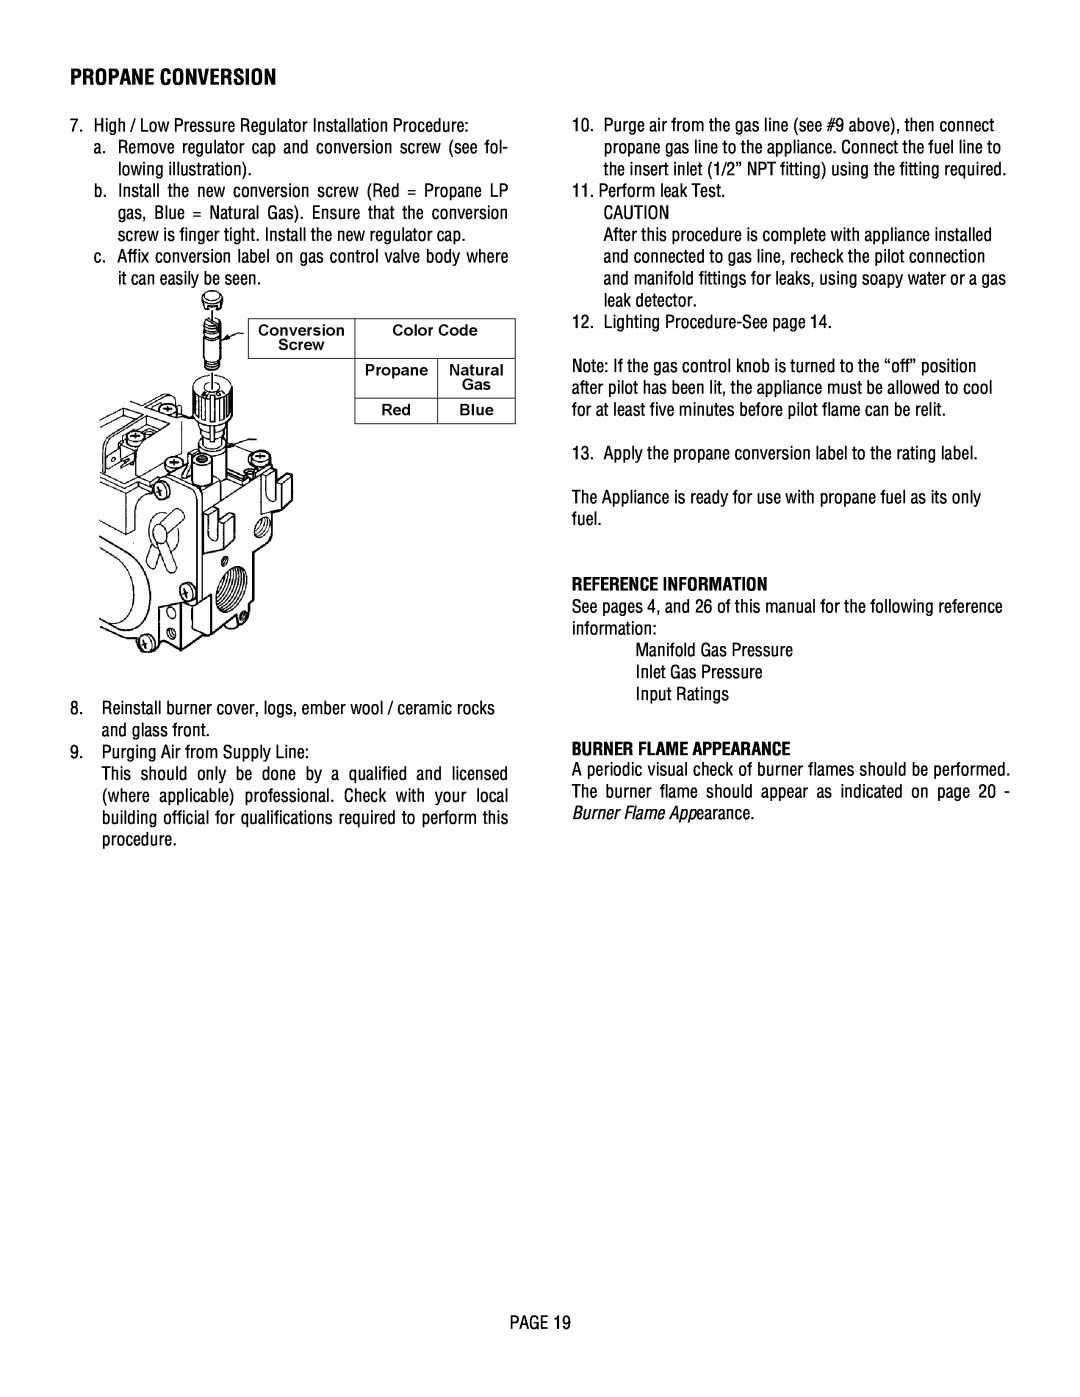 Lennox Hearth L30 DVF-2 operation manual Propane Conversion, Reference Information, Burner Flame Appearance 